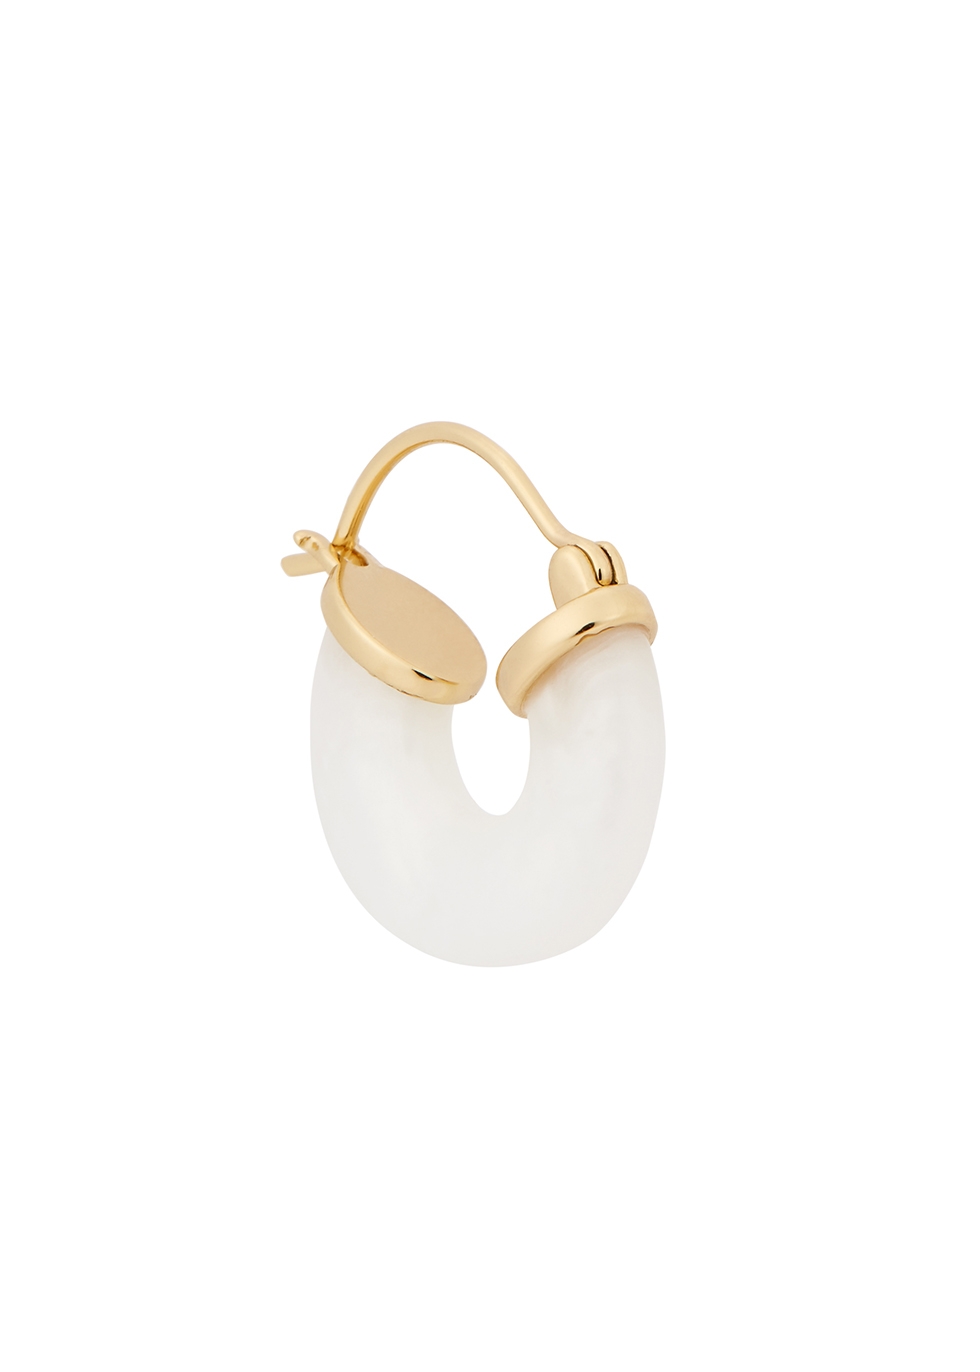 Anni Lu Petite White Swell 18kt Gold-plated Hoop Earrings